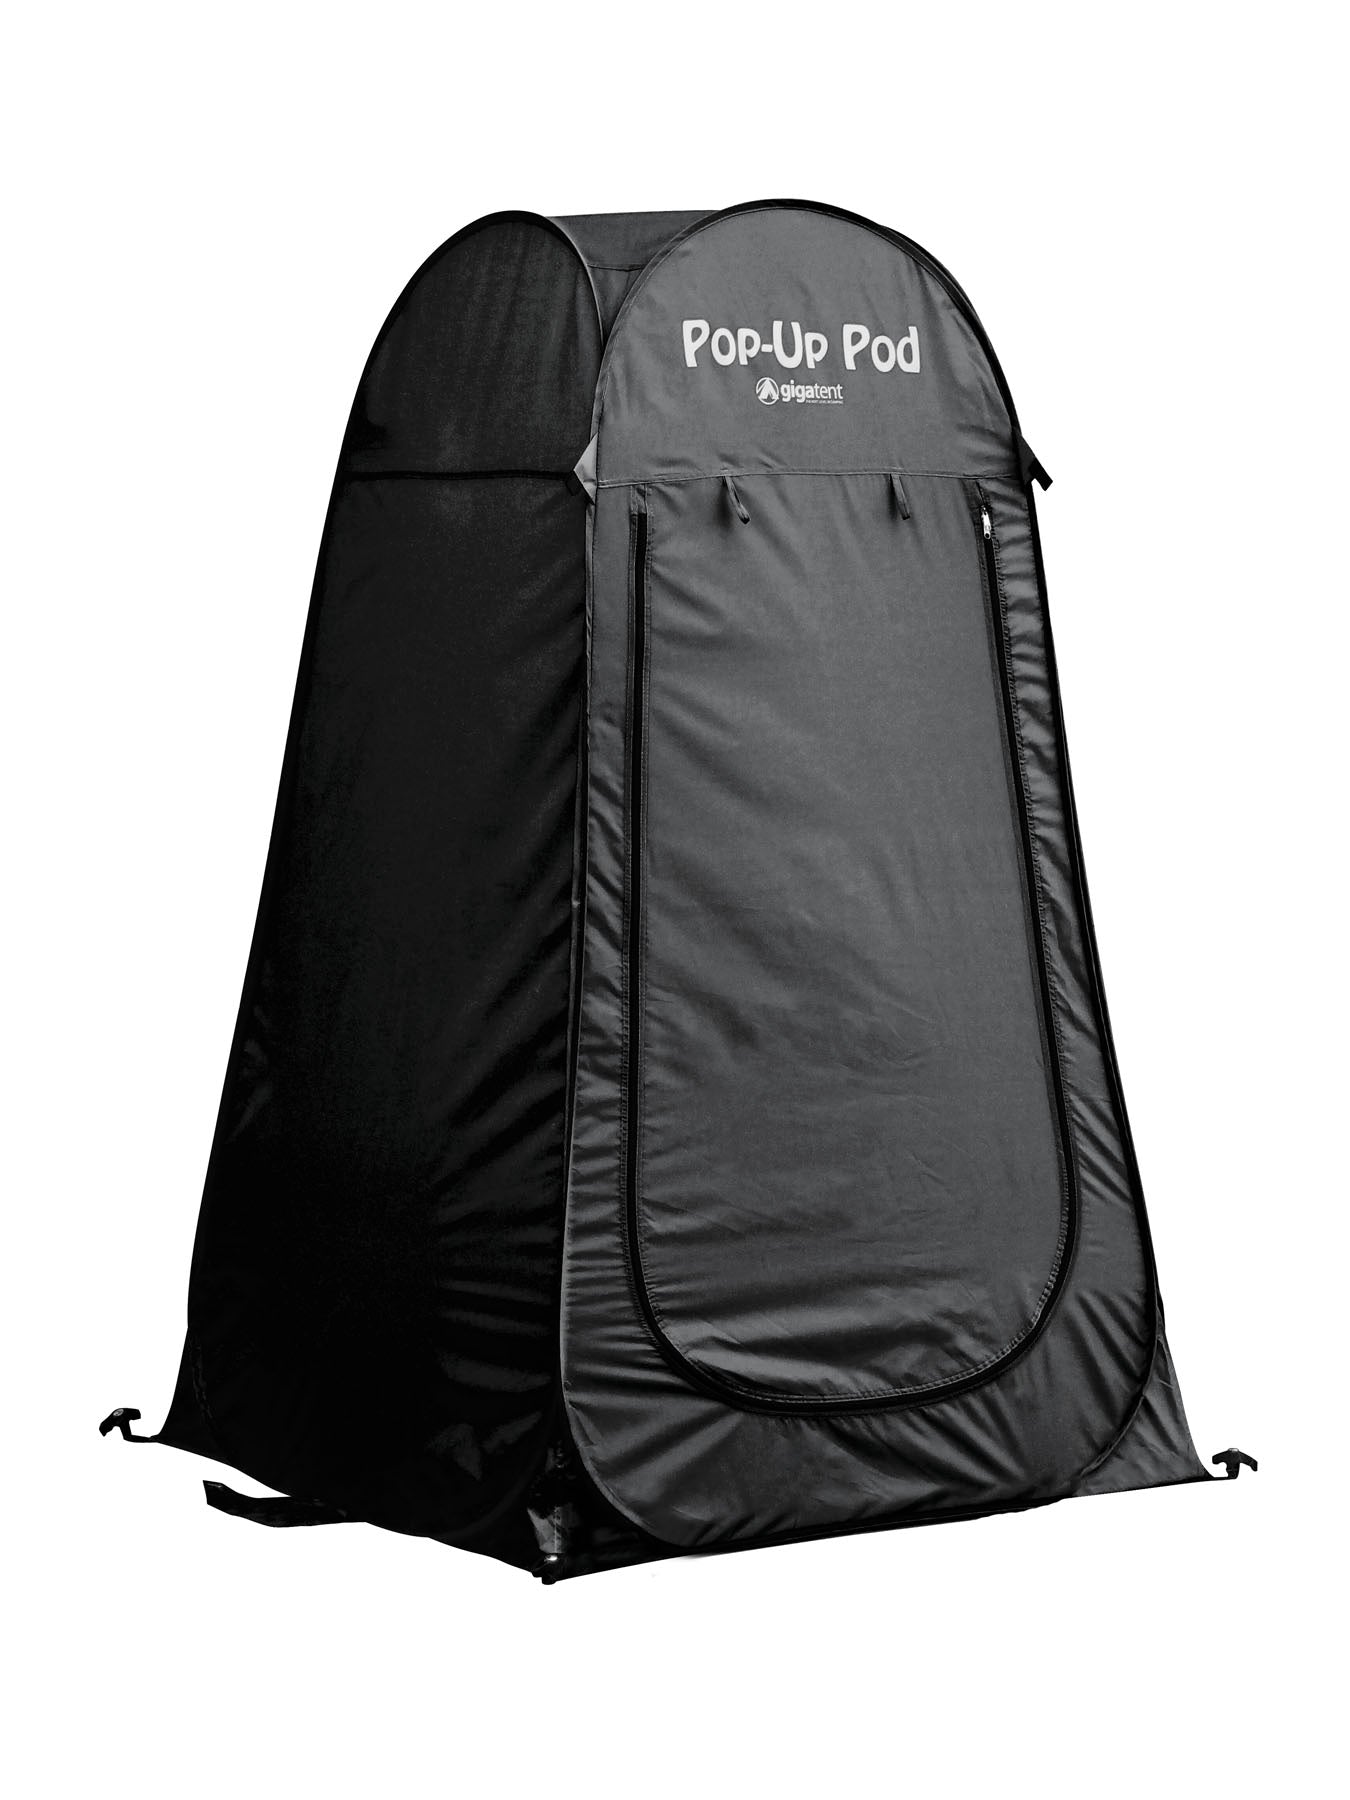 GigaTent 1-Person Pop Up Privacy Tent for Camping Changing Room